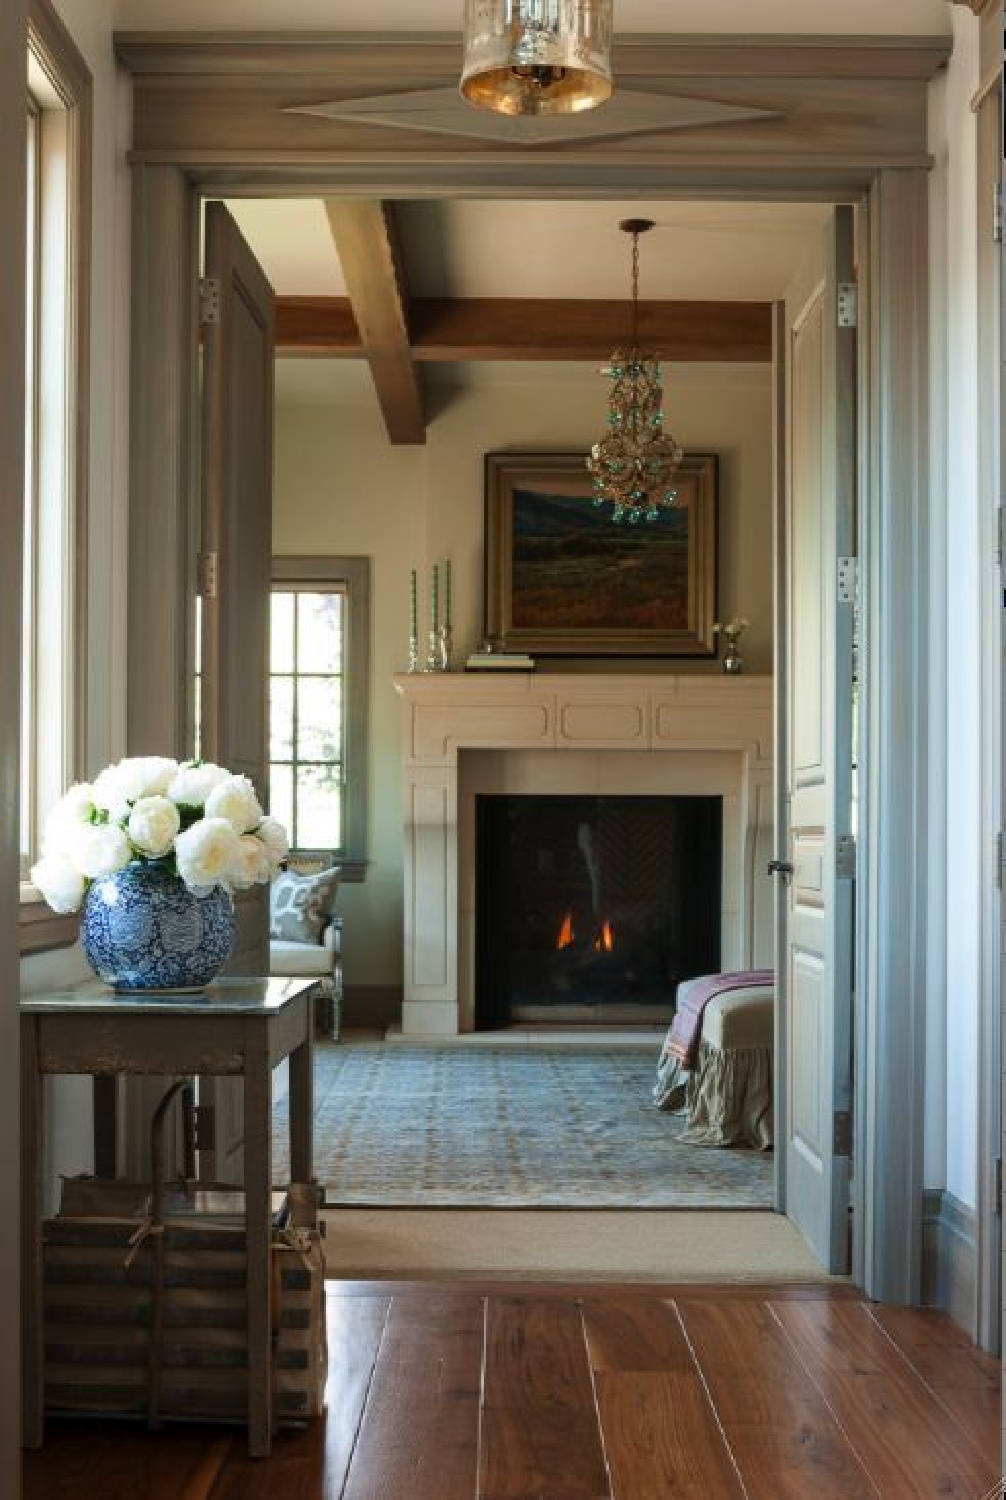 Desiree Ashworth - French Nordic style interior with European country details and Gustavian influence.